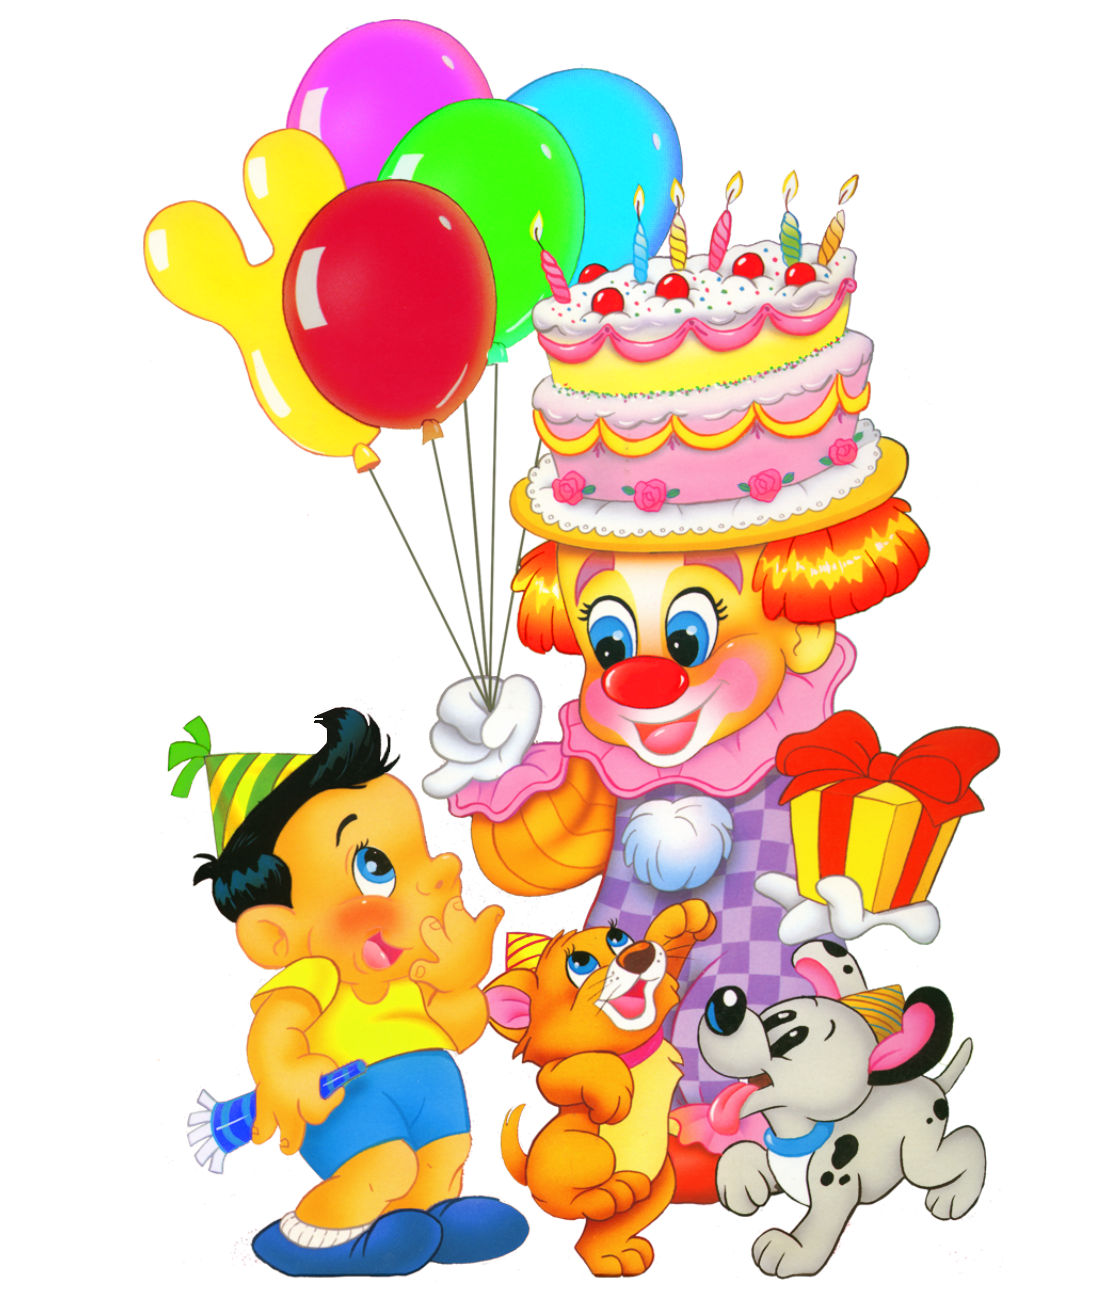 https://gallery.yopriceville.com/var/albums/Free-Clipart-Pictures/Happy-Birthday-PNG/Happy_Birthday_Kids_Decor_PNG_Clipart_Picture.png?m=1435028101